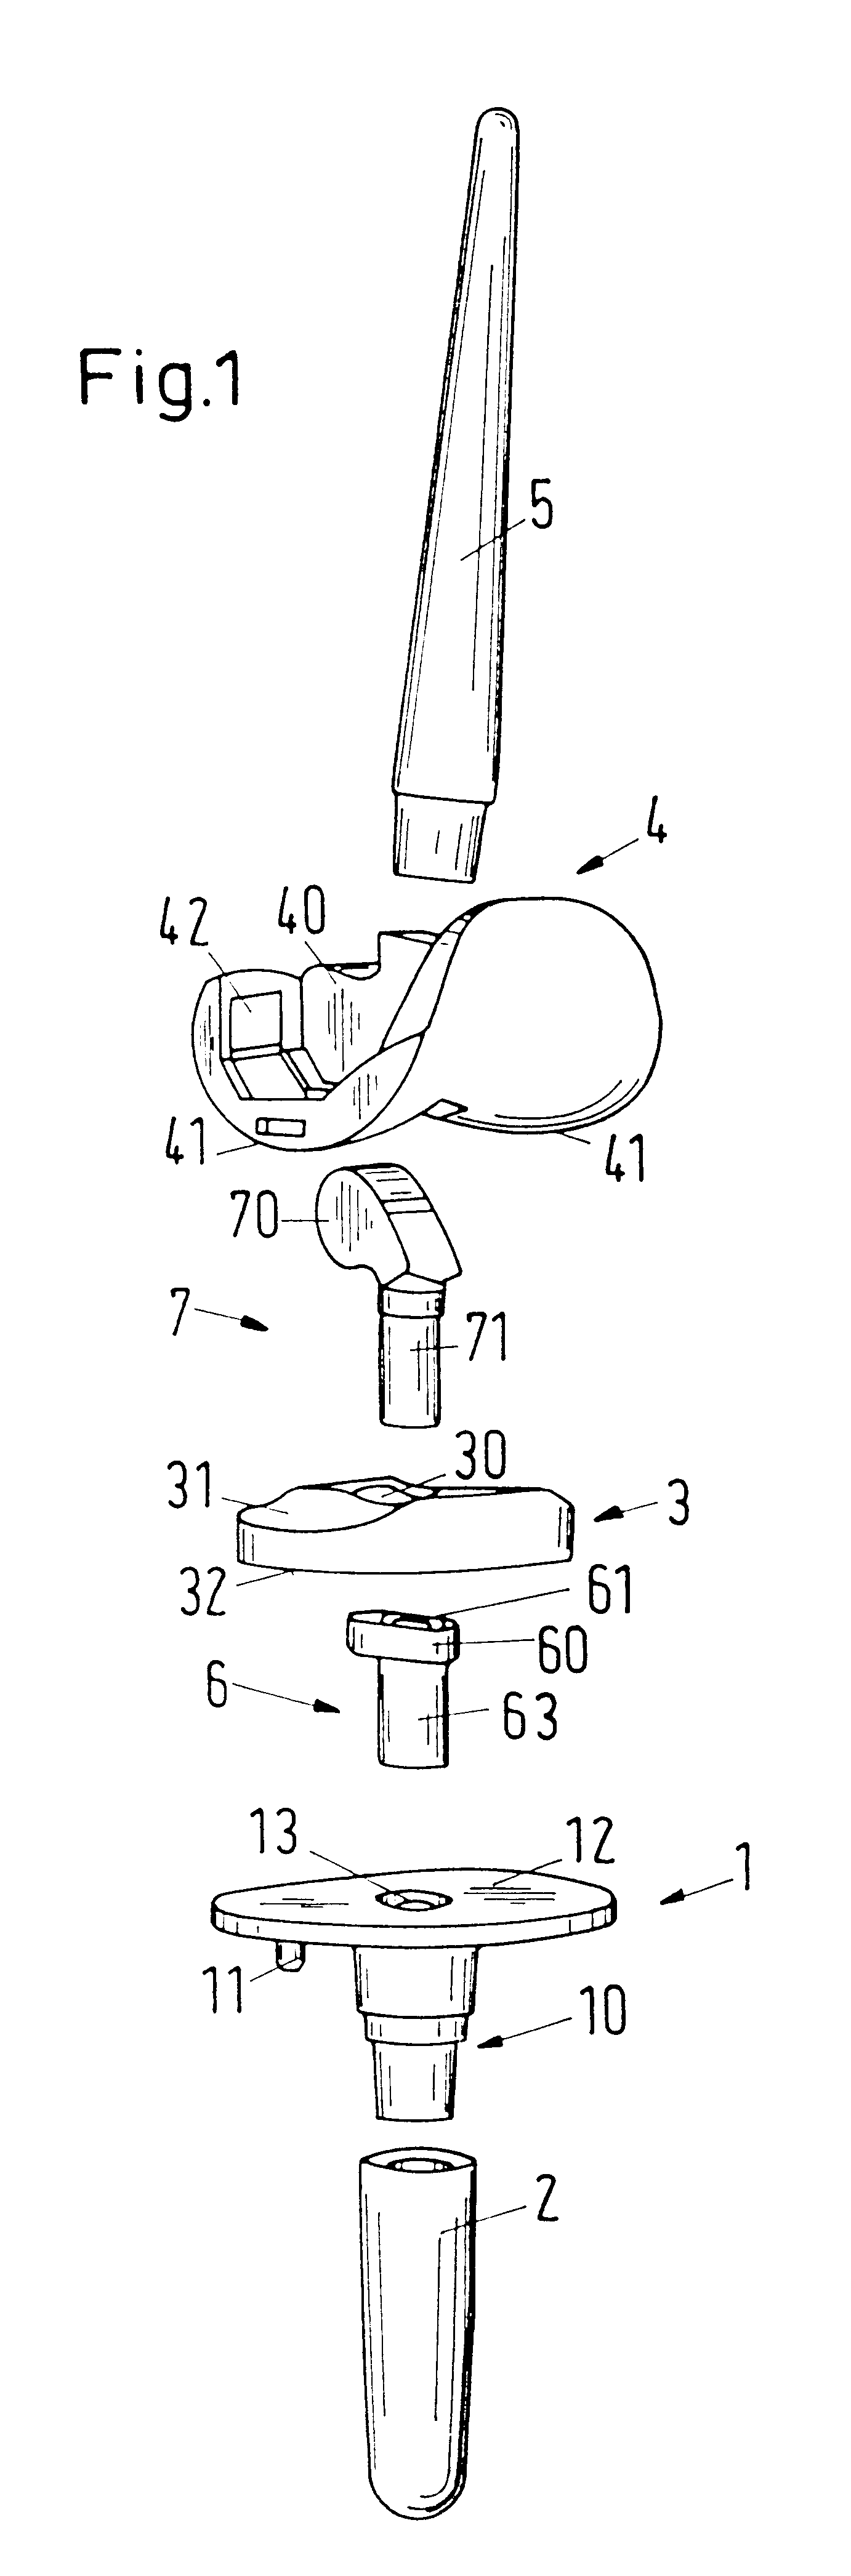 Kit for a knee joint prosthesis